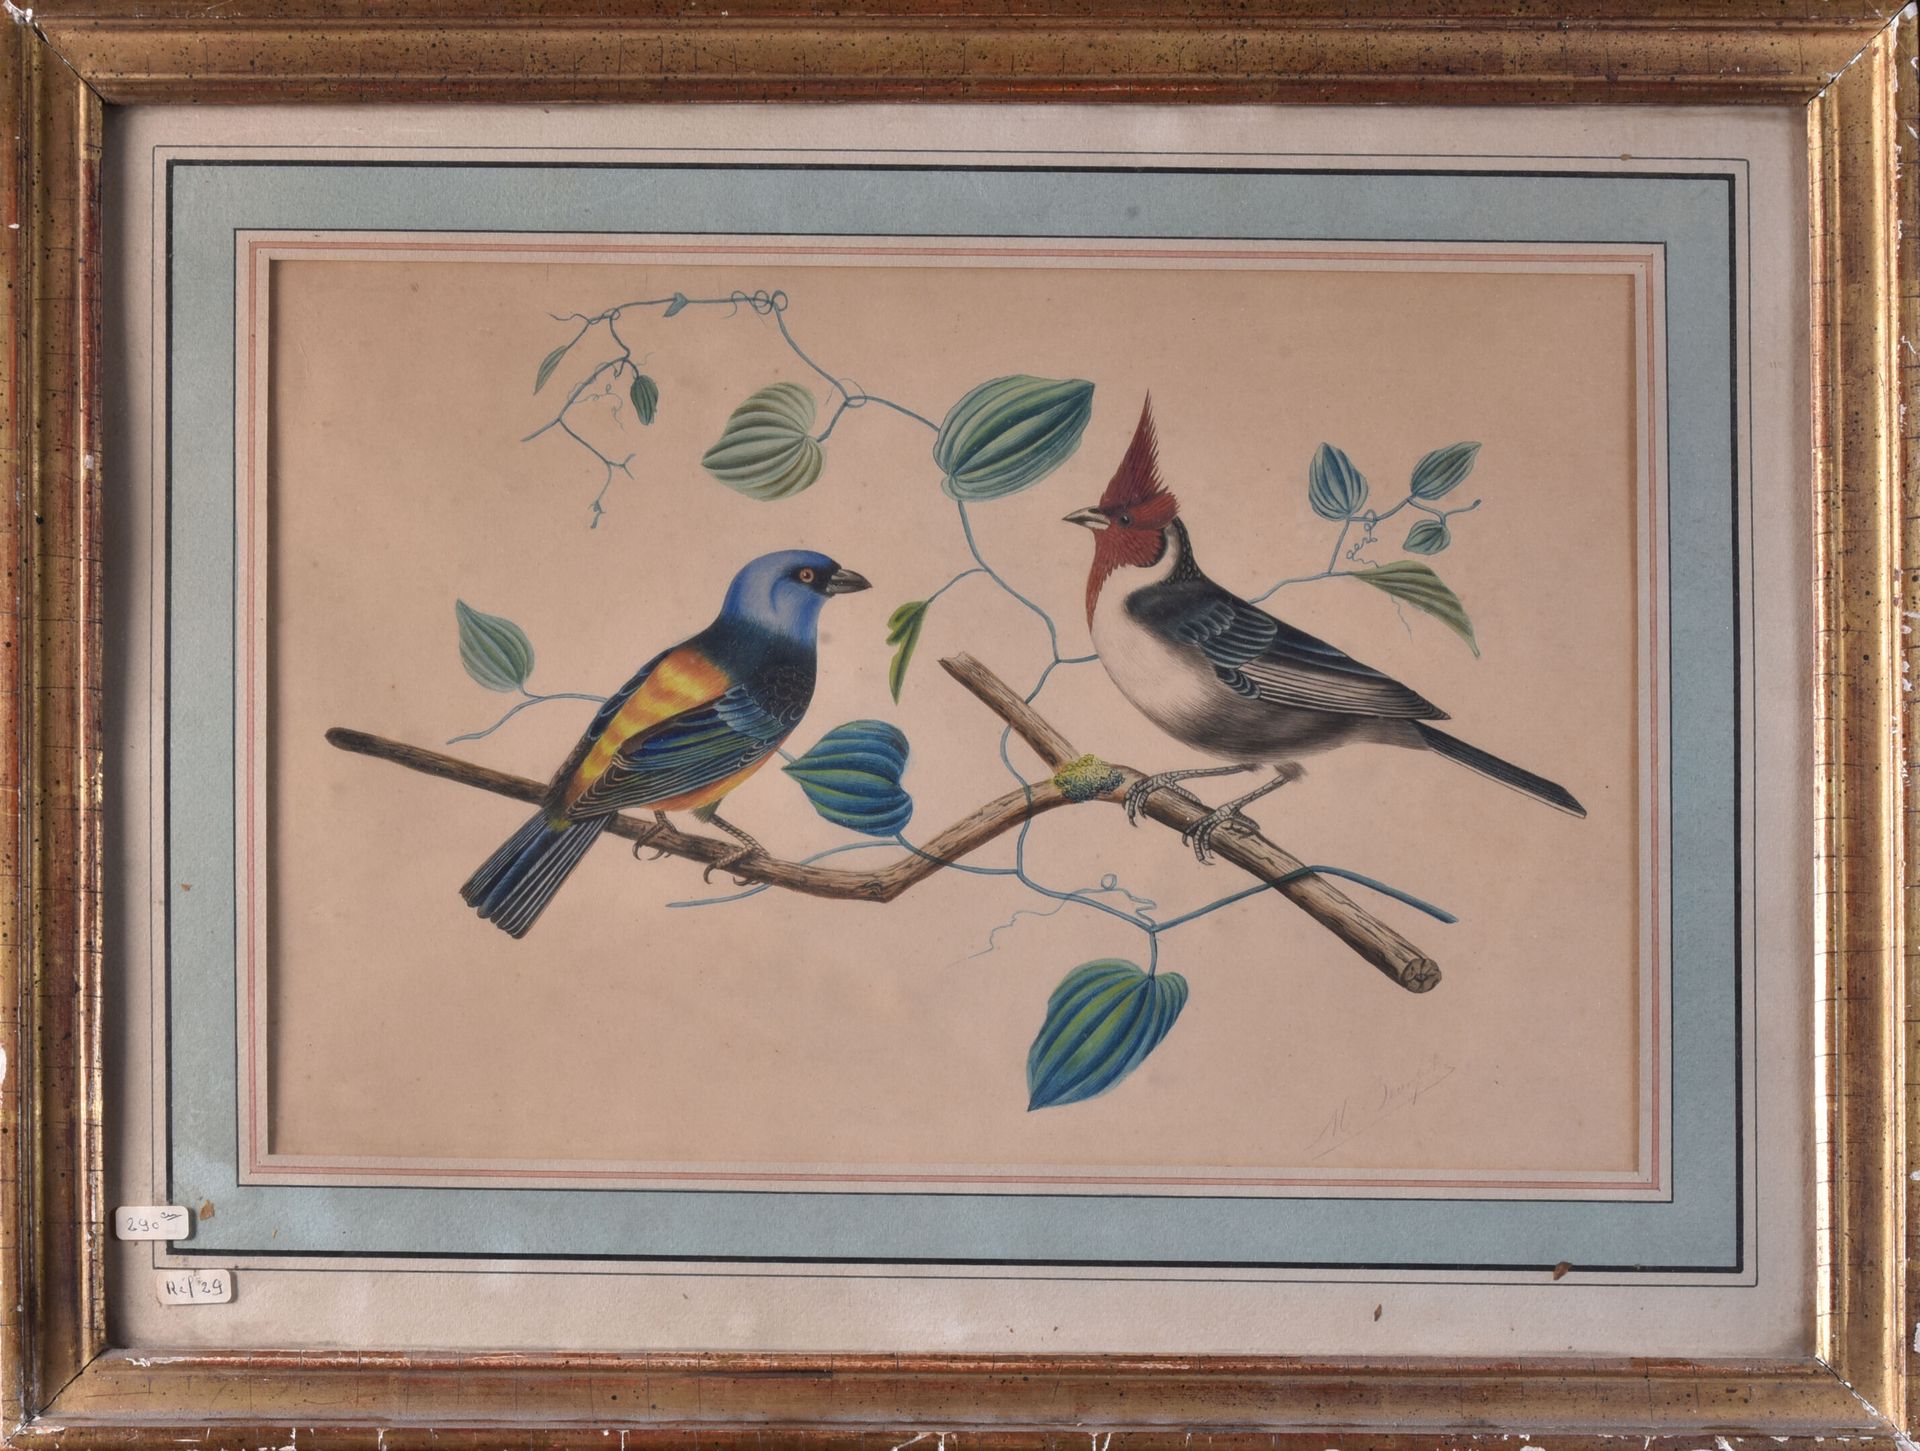 Null M. BEAUFILS (19th century)

Birds in the air

Watercolor, signed lower righ&hellip;